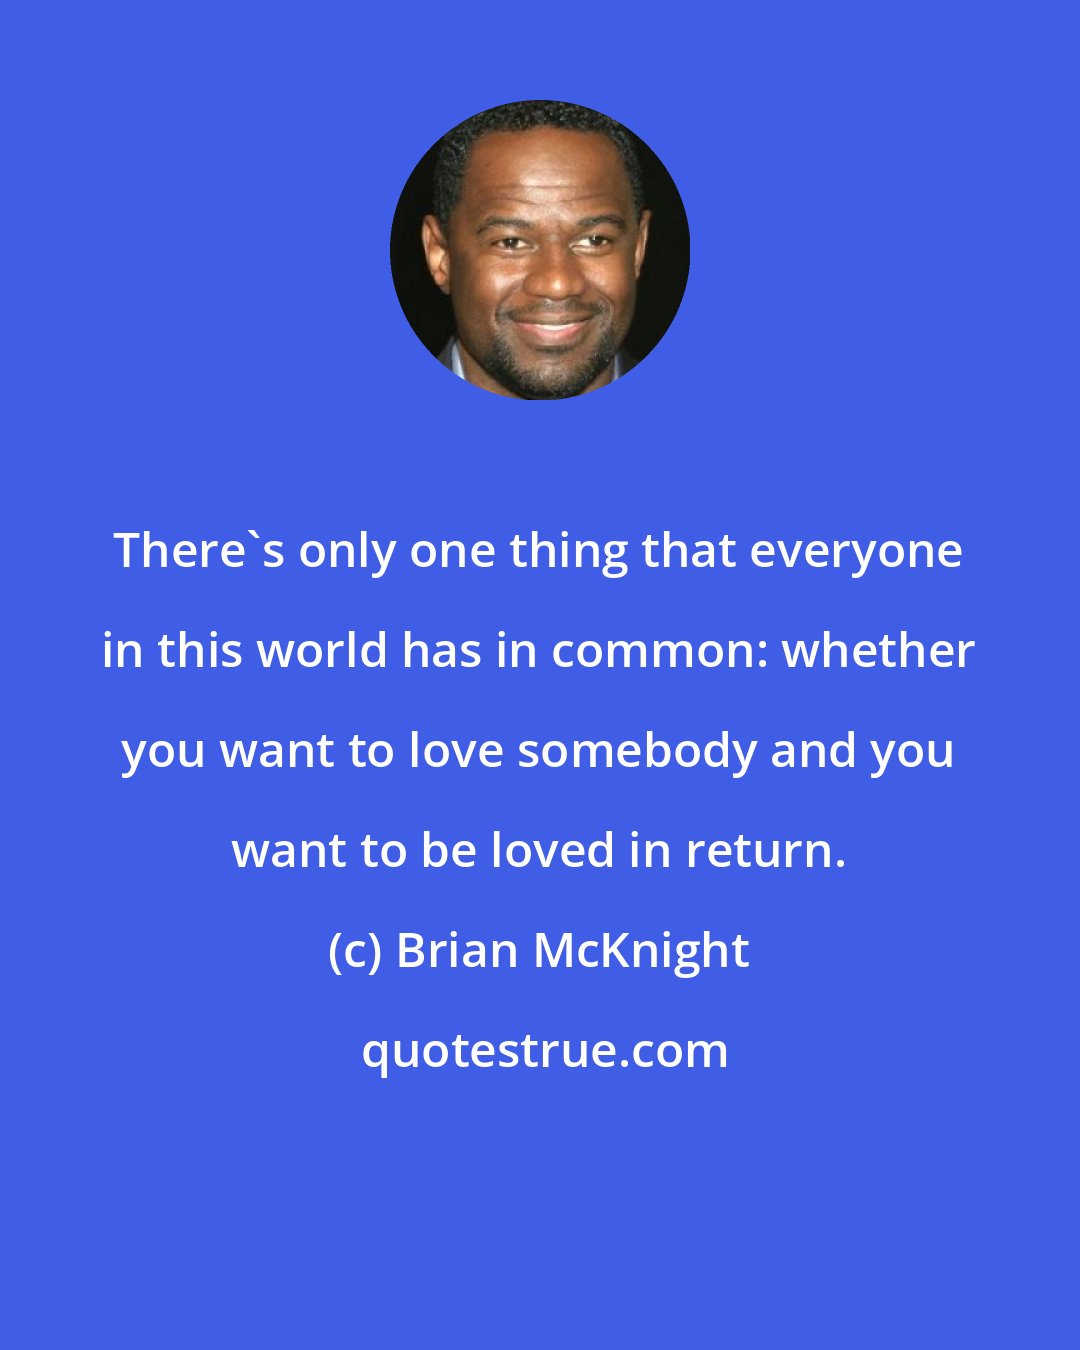 Brian McKnight: There's only one thing that everyone in this world has in common: whether you want to love somebody and you want to be loved in return.